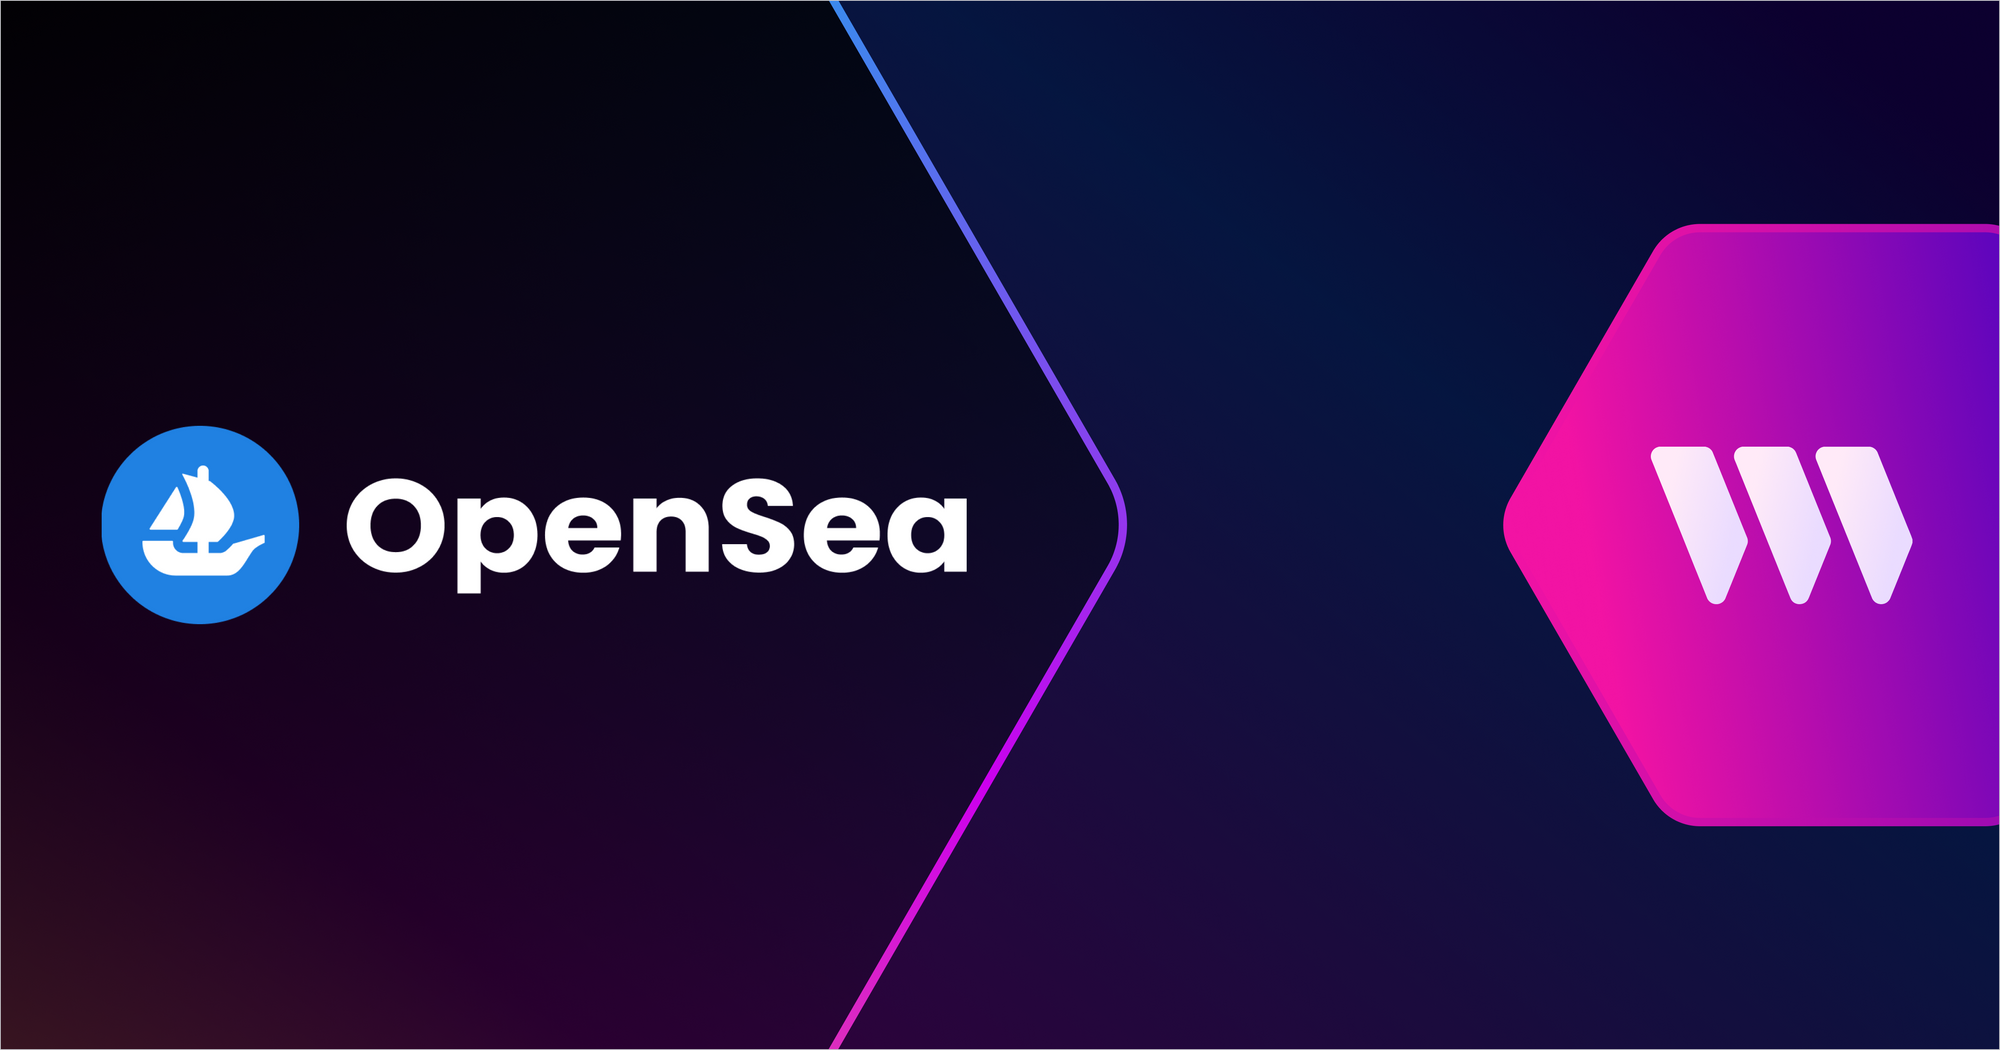 thirdweb's Smart Contracts now support Opensea's Royalty Filter for Creator Earnings